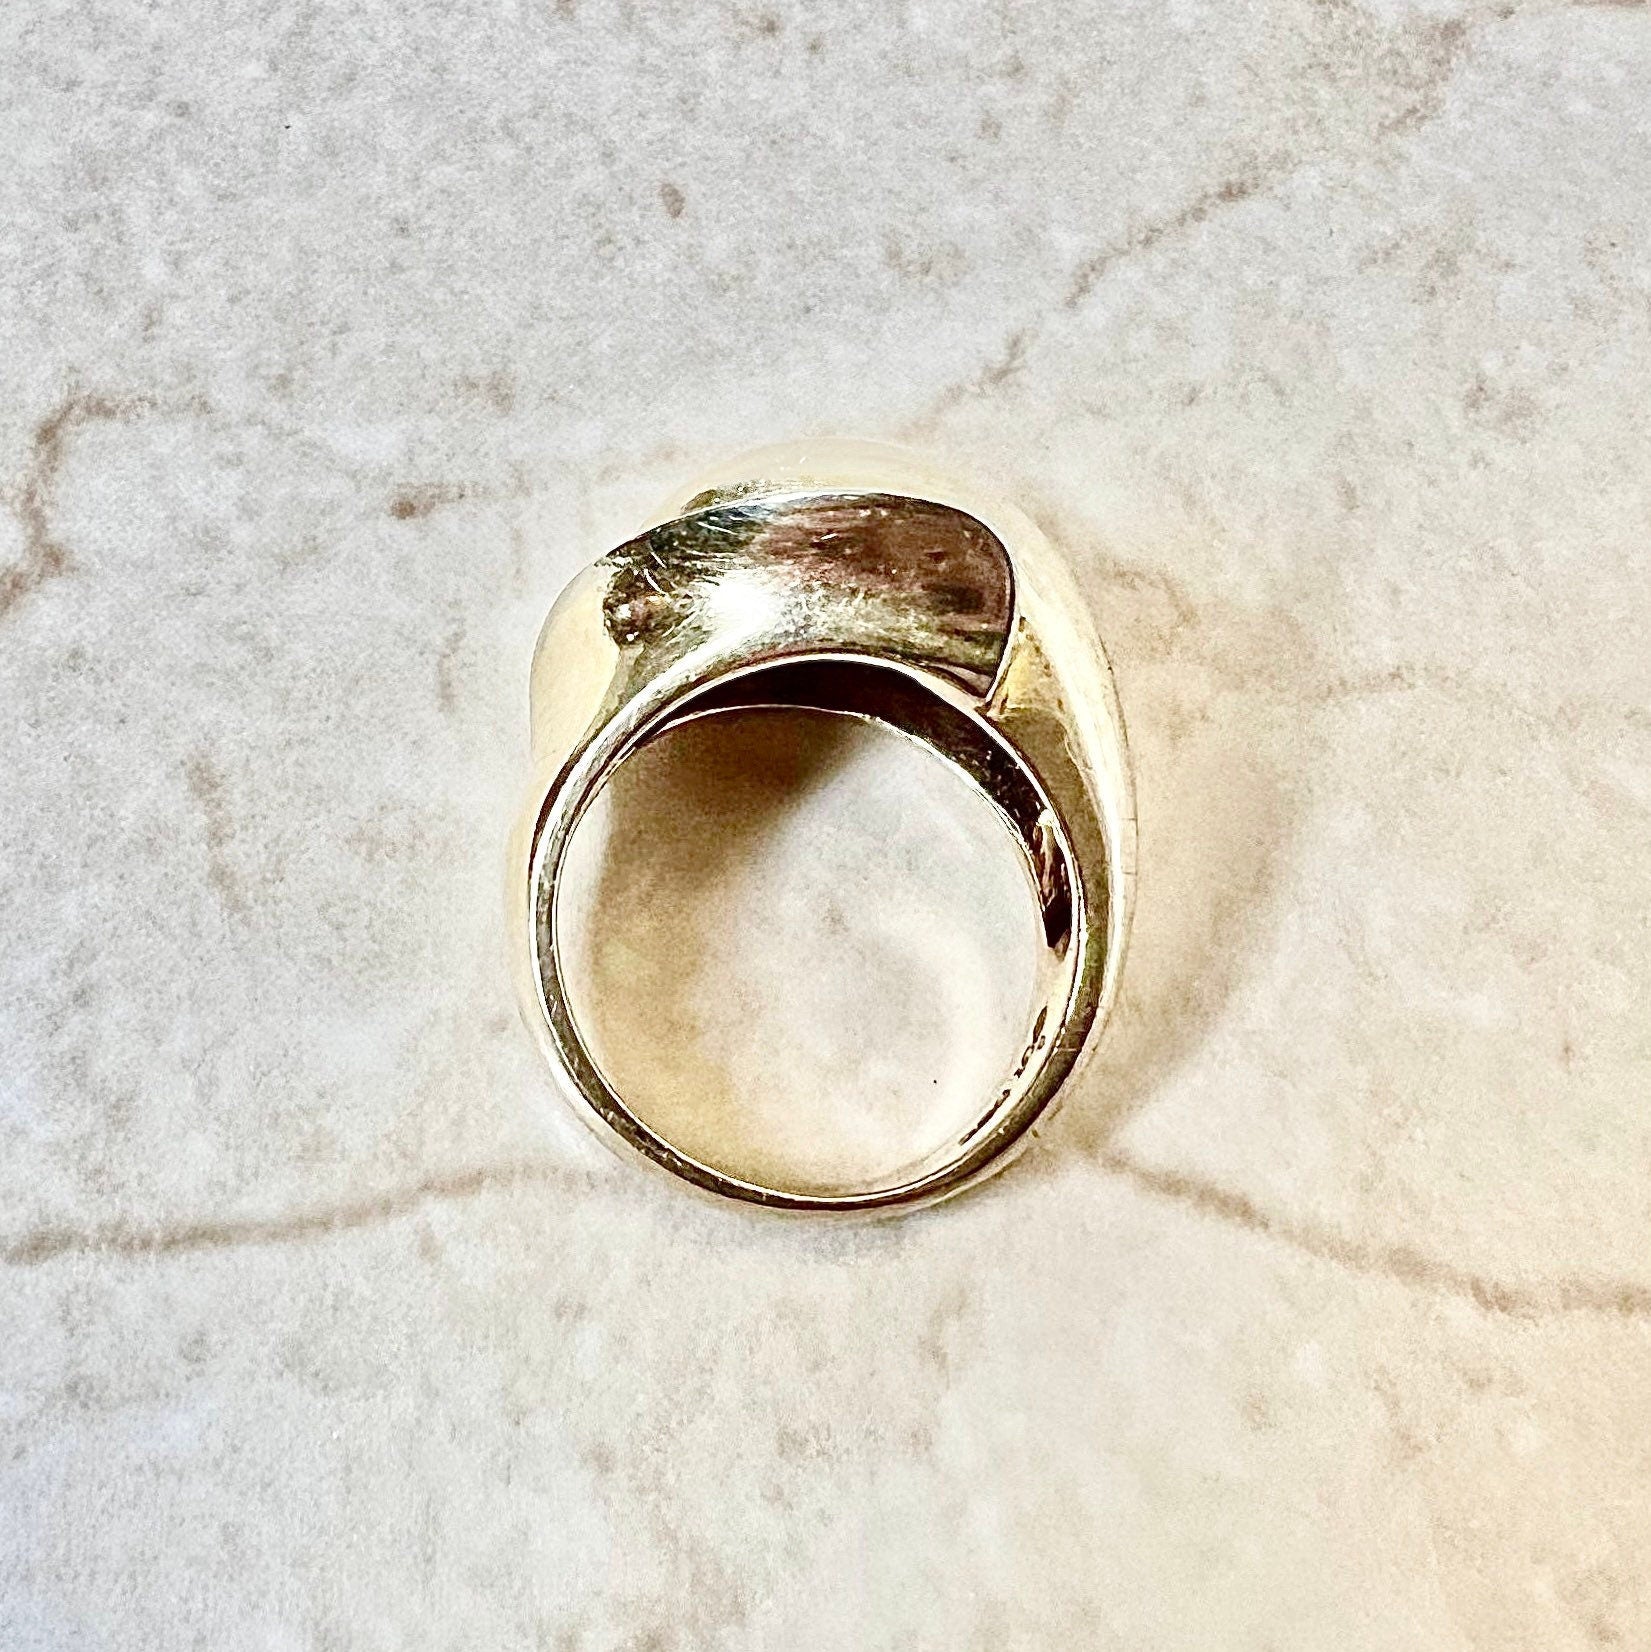 Vintage 14K Diamond Dome Ring 0.45 CTTW - Chunky Yellow Gold Diamond Cocktail Ring - Birthday Gift - Best Gift For Her - Anniversary Gift